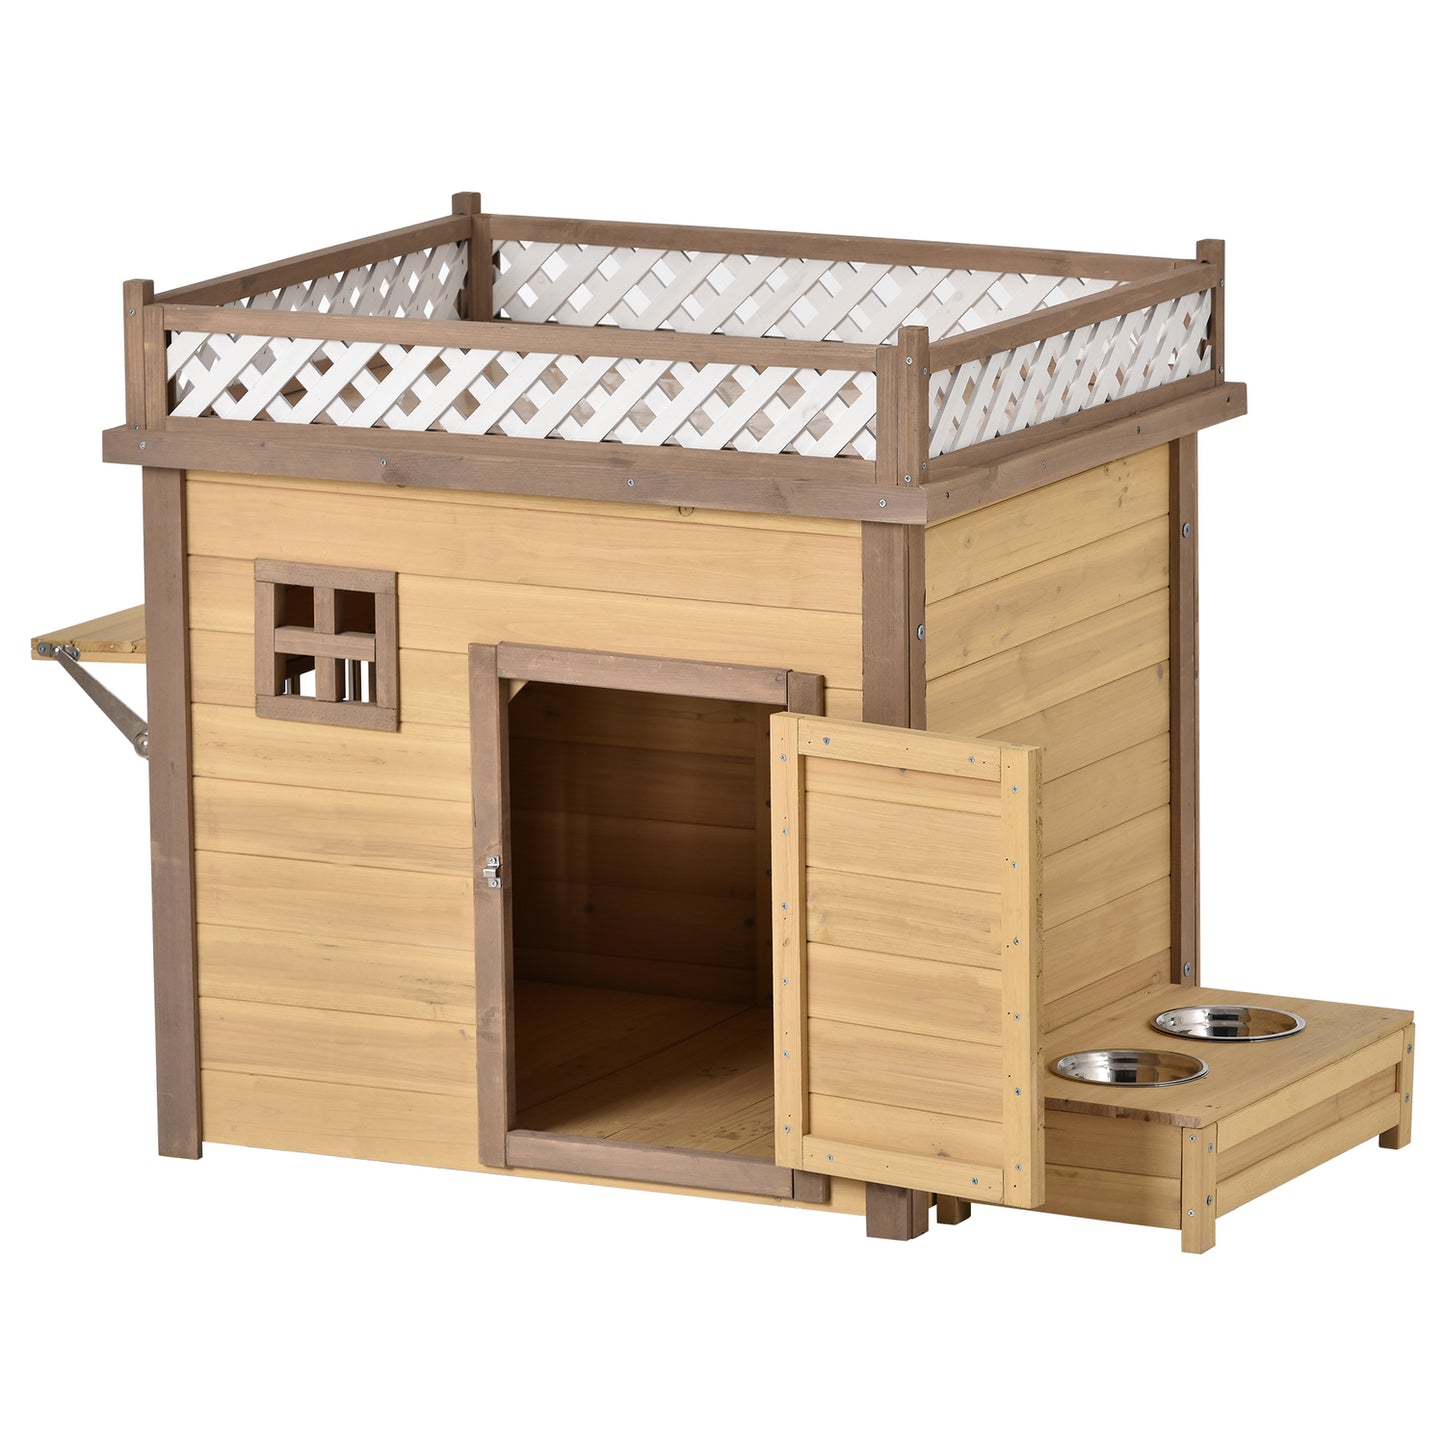 CHURANTY 31.5” Wooden Puppy Pet Dog House Wood Room Puppy Shelter Kennel Outdoor & Indoor Dog Crate, with Flower Stand, Plant Stand, with Wood Feeder